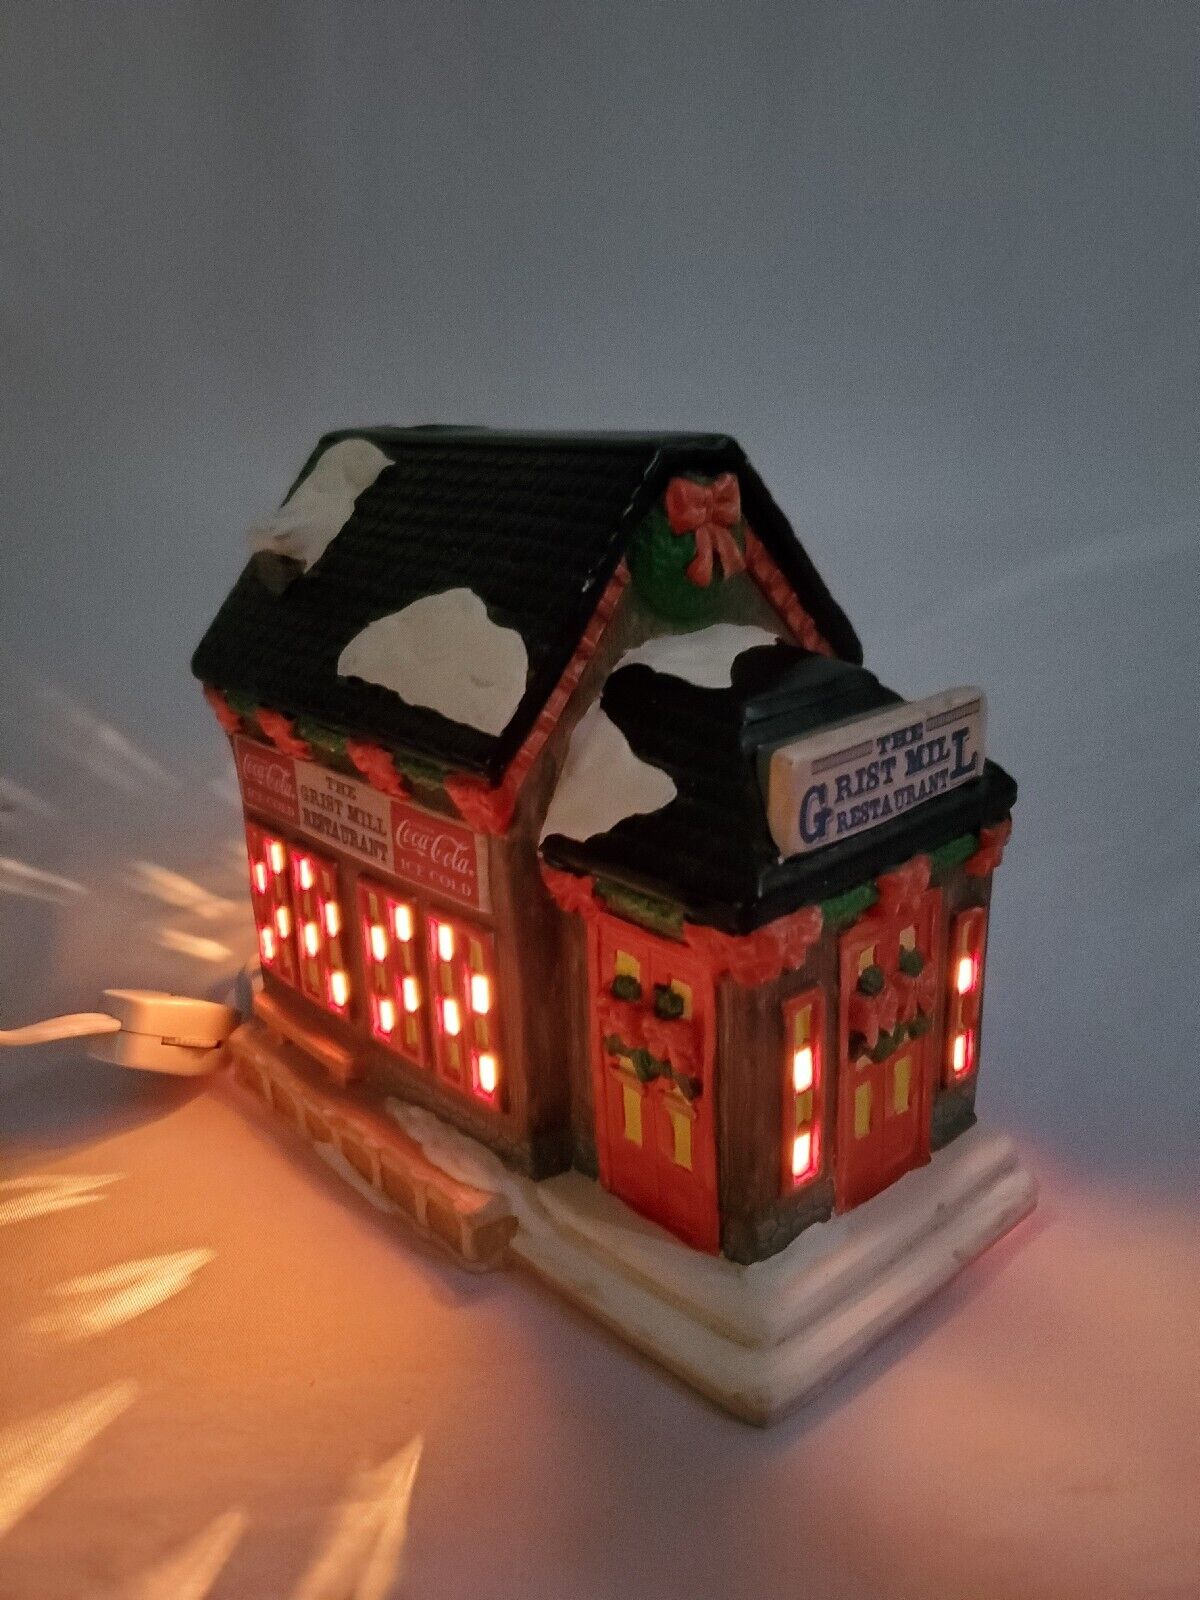 Vintage Grist Mill Restaurant Coca Cola House Lighted Ceramic 1995 Town Square